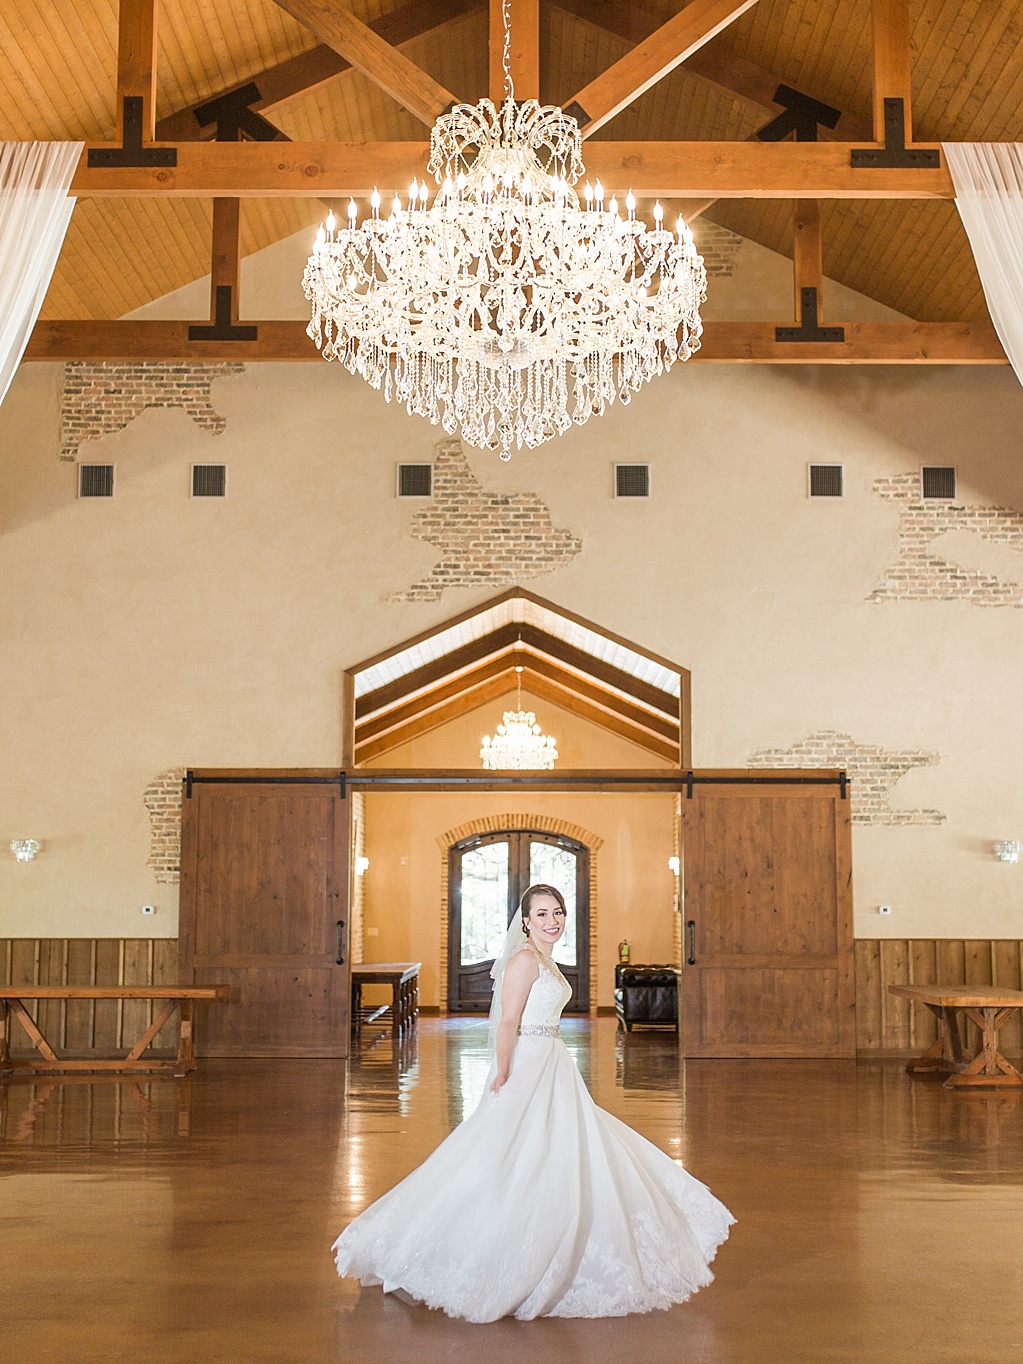 A Summer Bridal Photo Session at The Chandelier of Gruene in New Braunfels Texas By Allison Jeffers Wedding Photography 0002